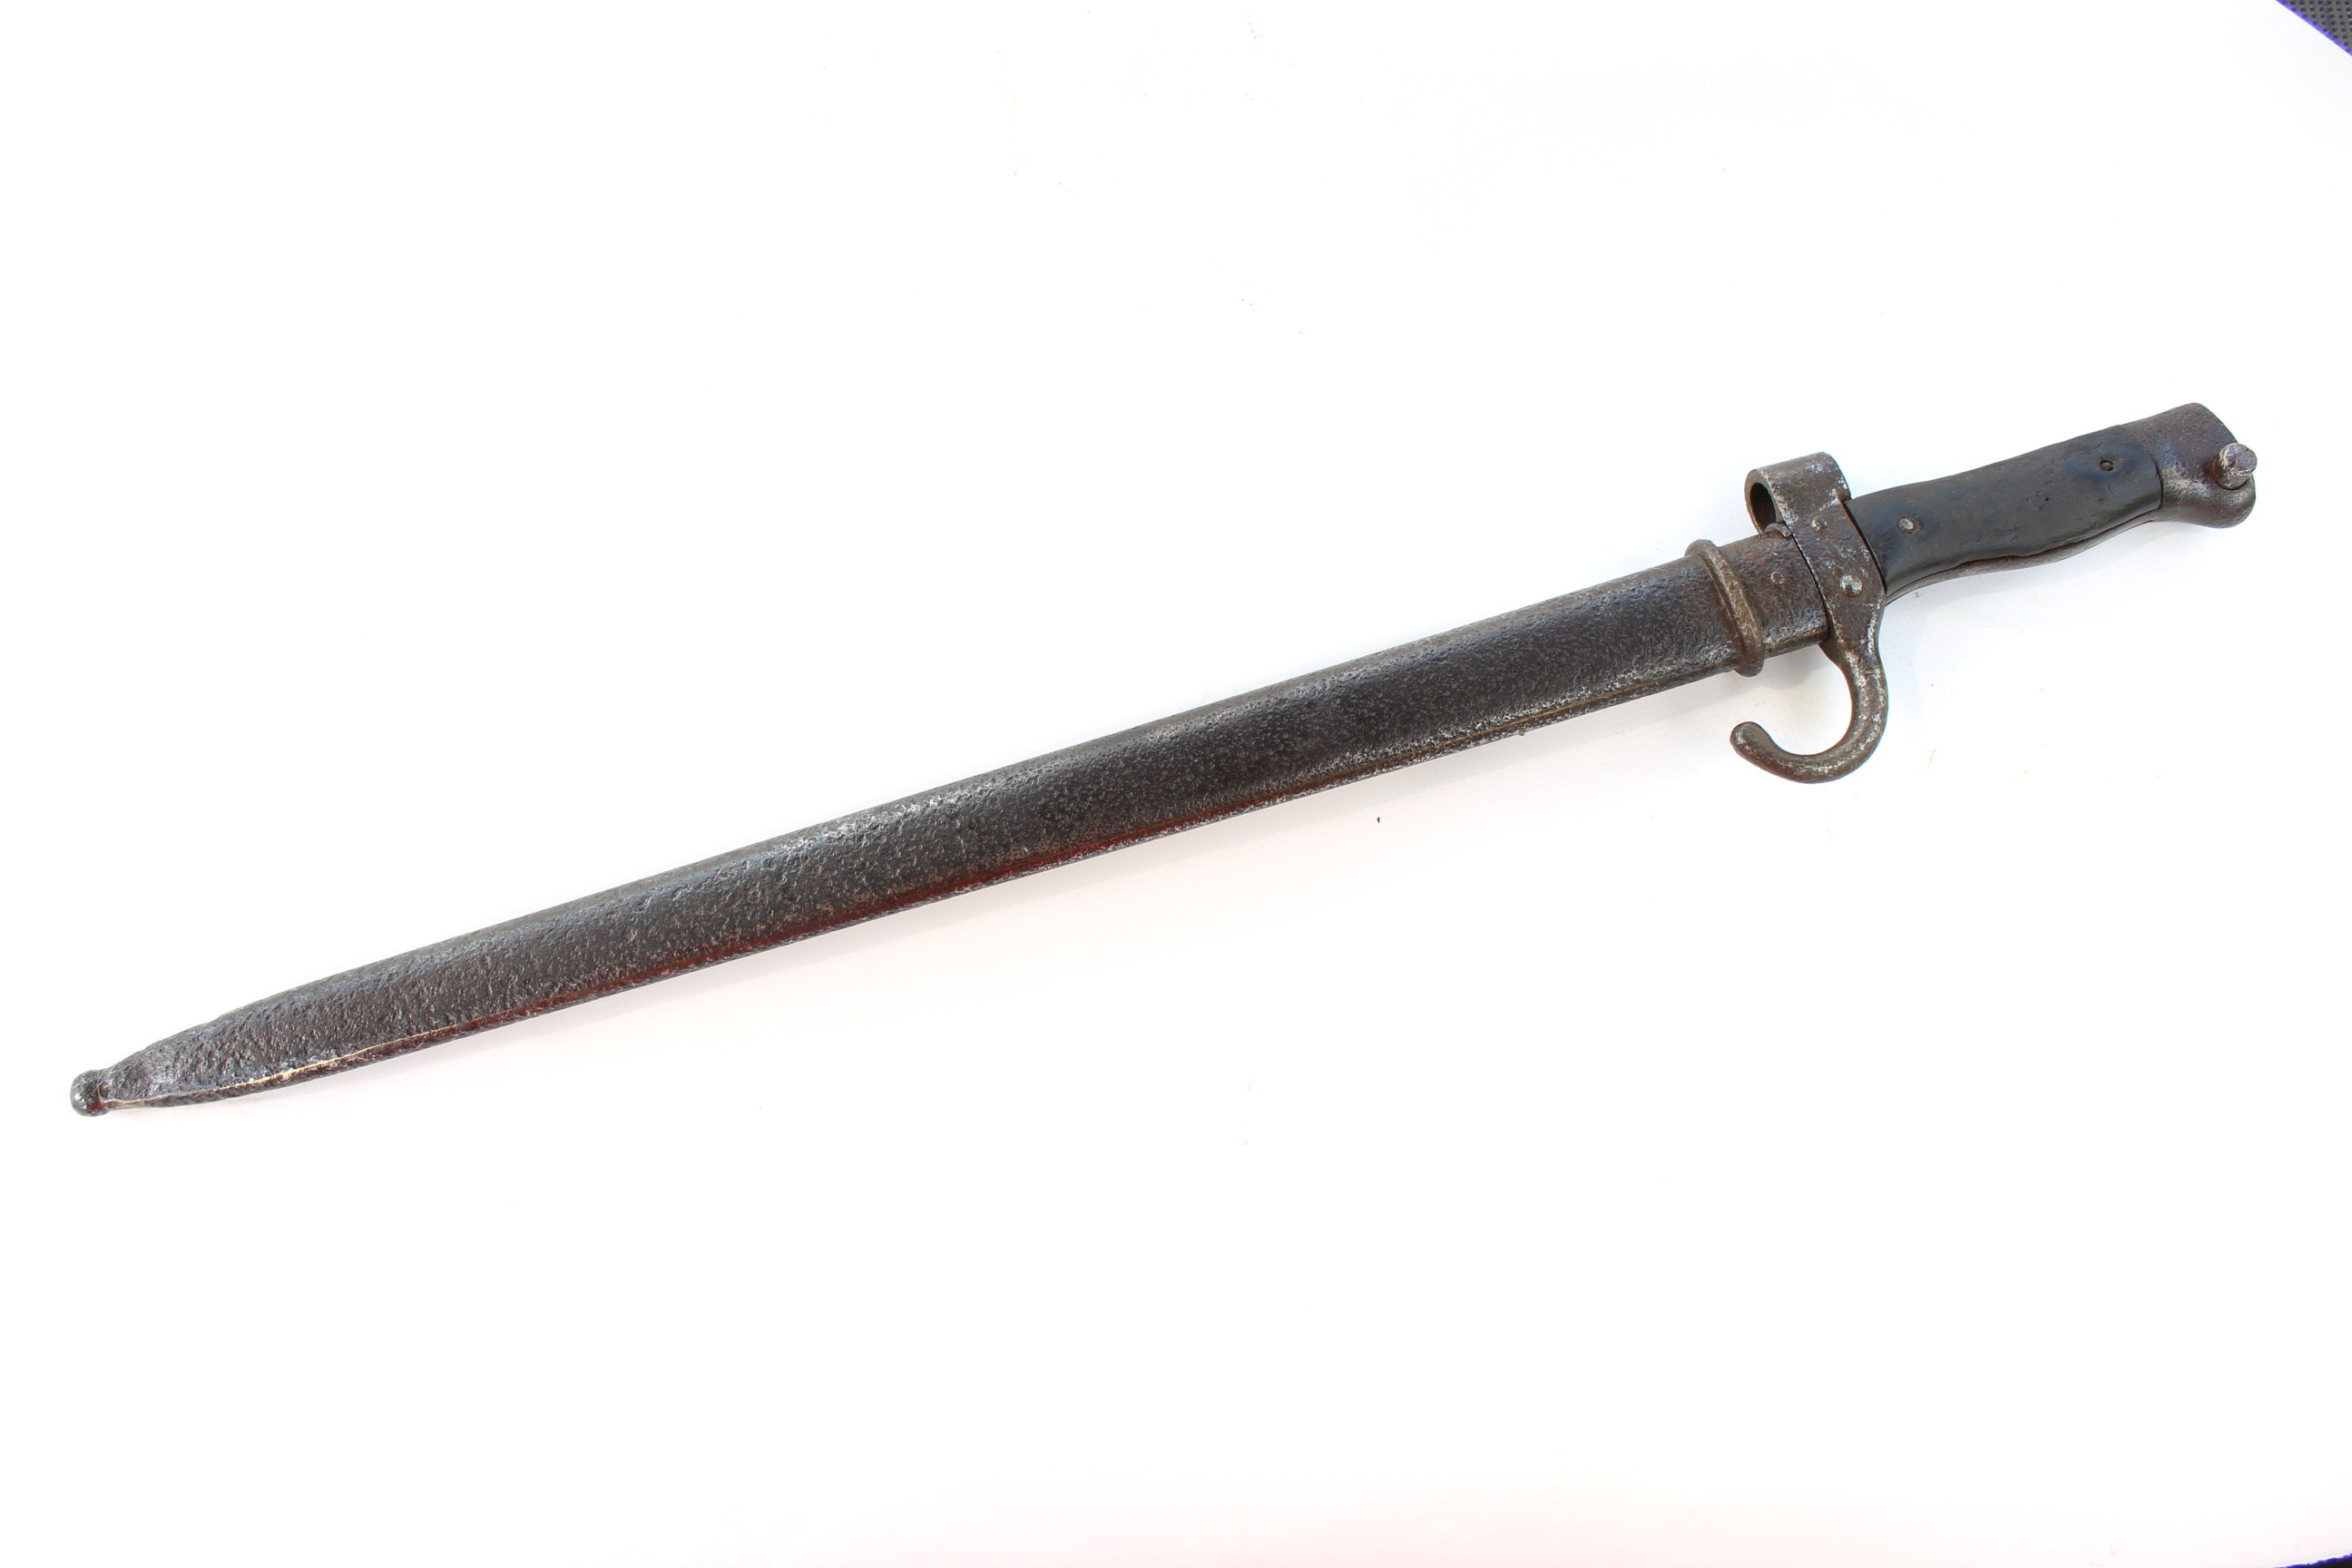 Original French Berthier bayonet model from 1892, signs of wear and pitted  with